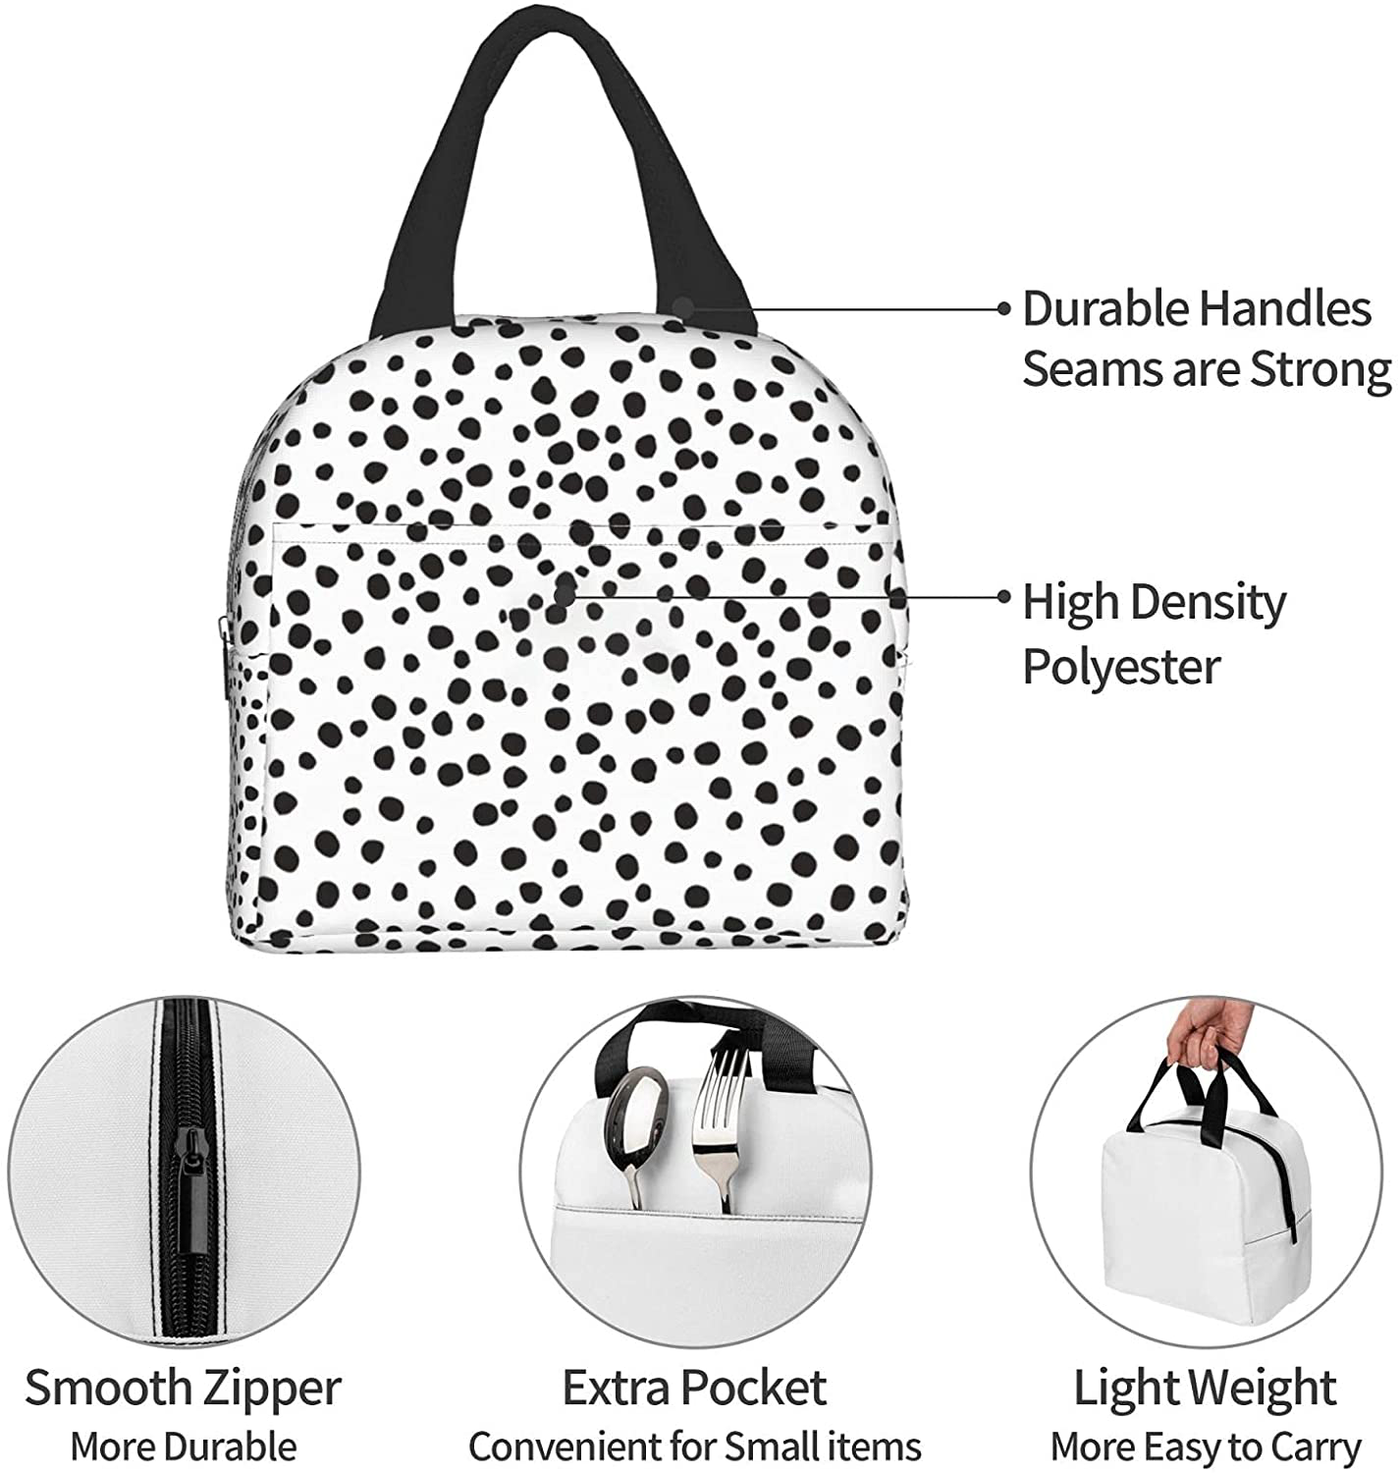 Easy Insulated Lunch Bags for Women Men, Cute Reusable Lunch Boxes Small Suitable Girls Boys Teens Work Picnic Travel, Strawberry